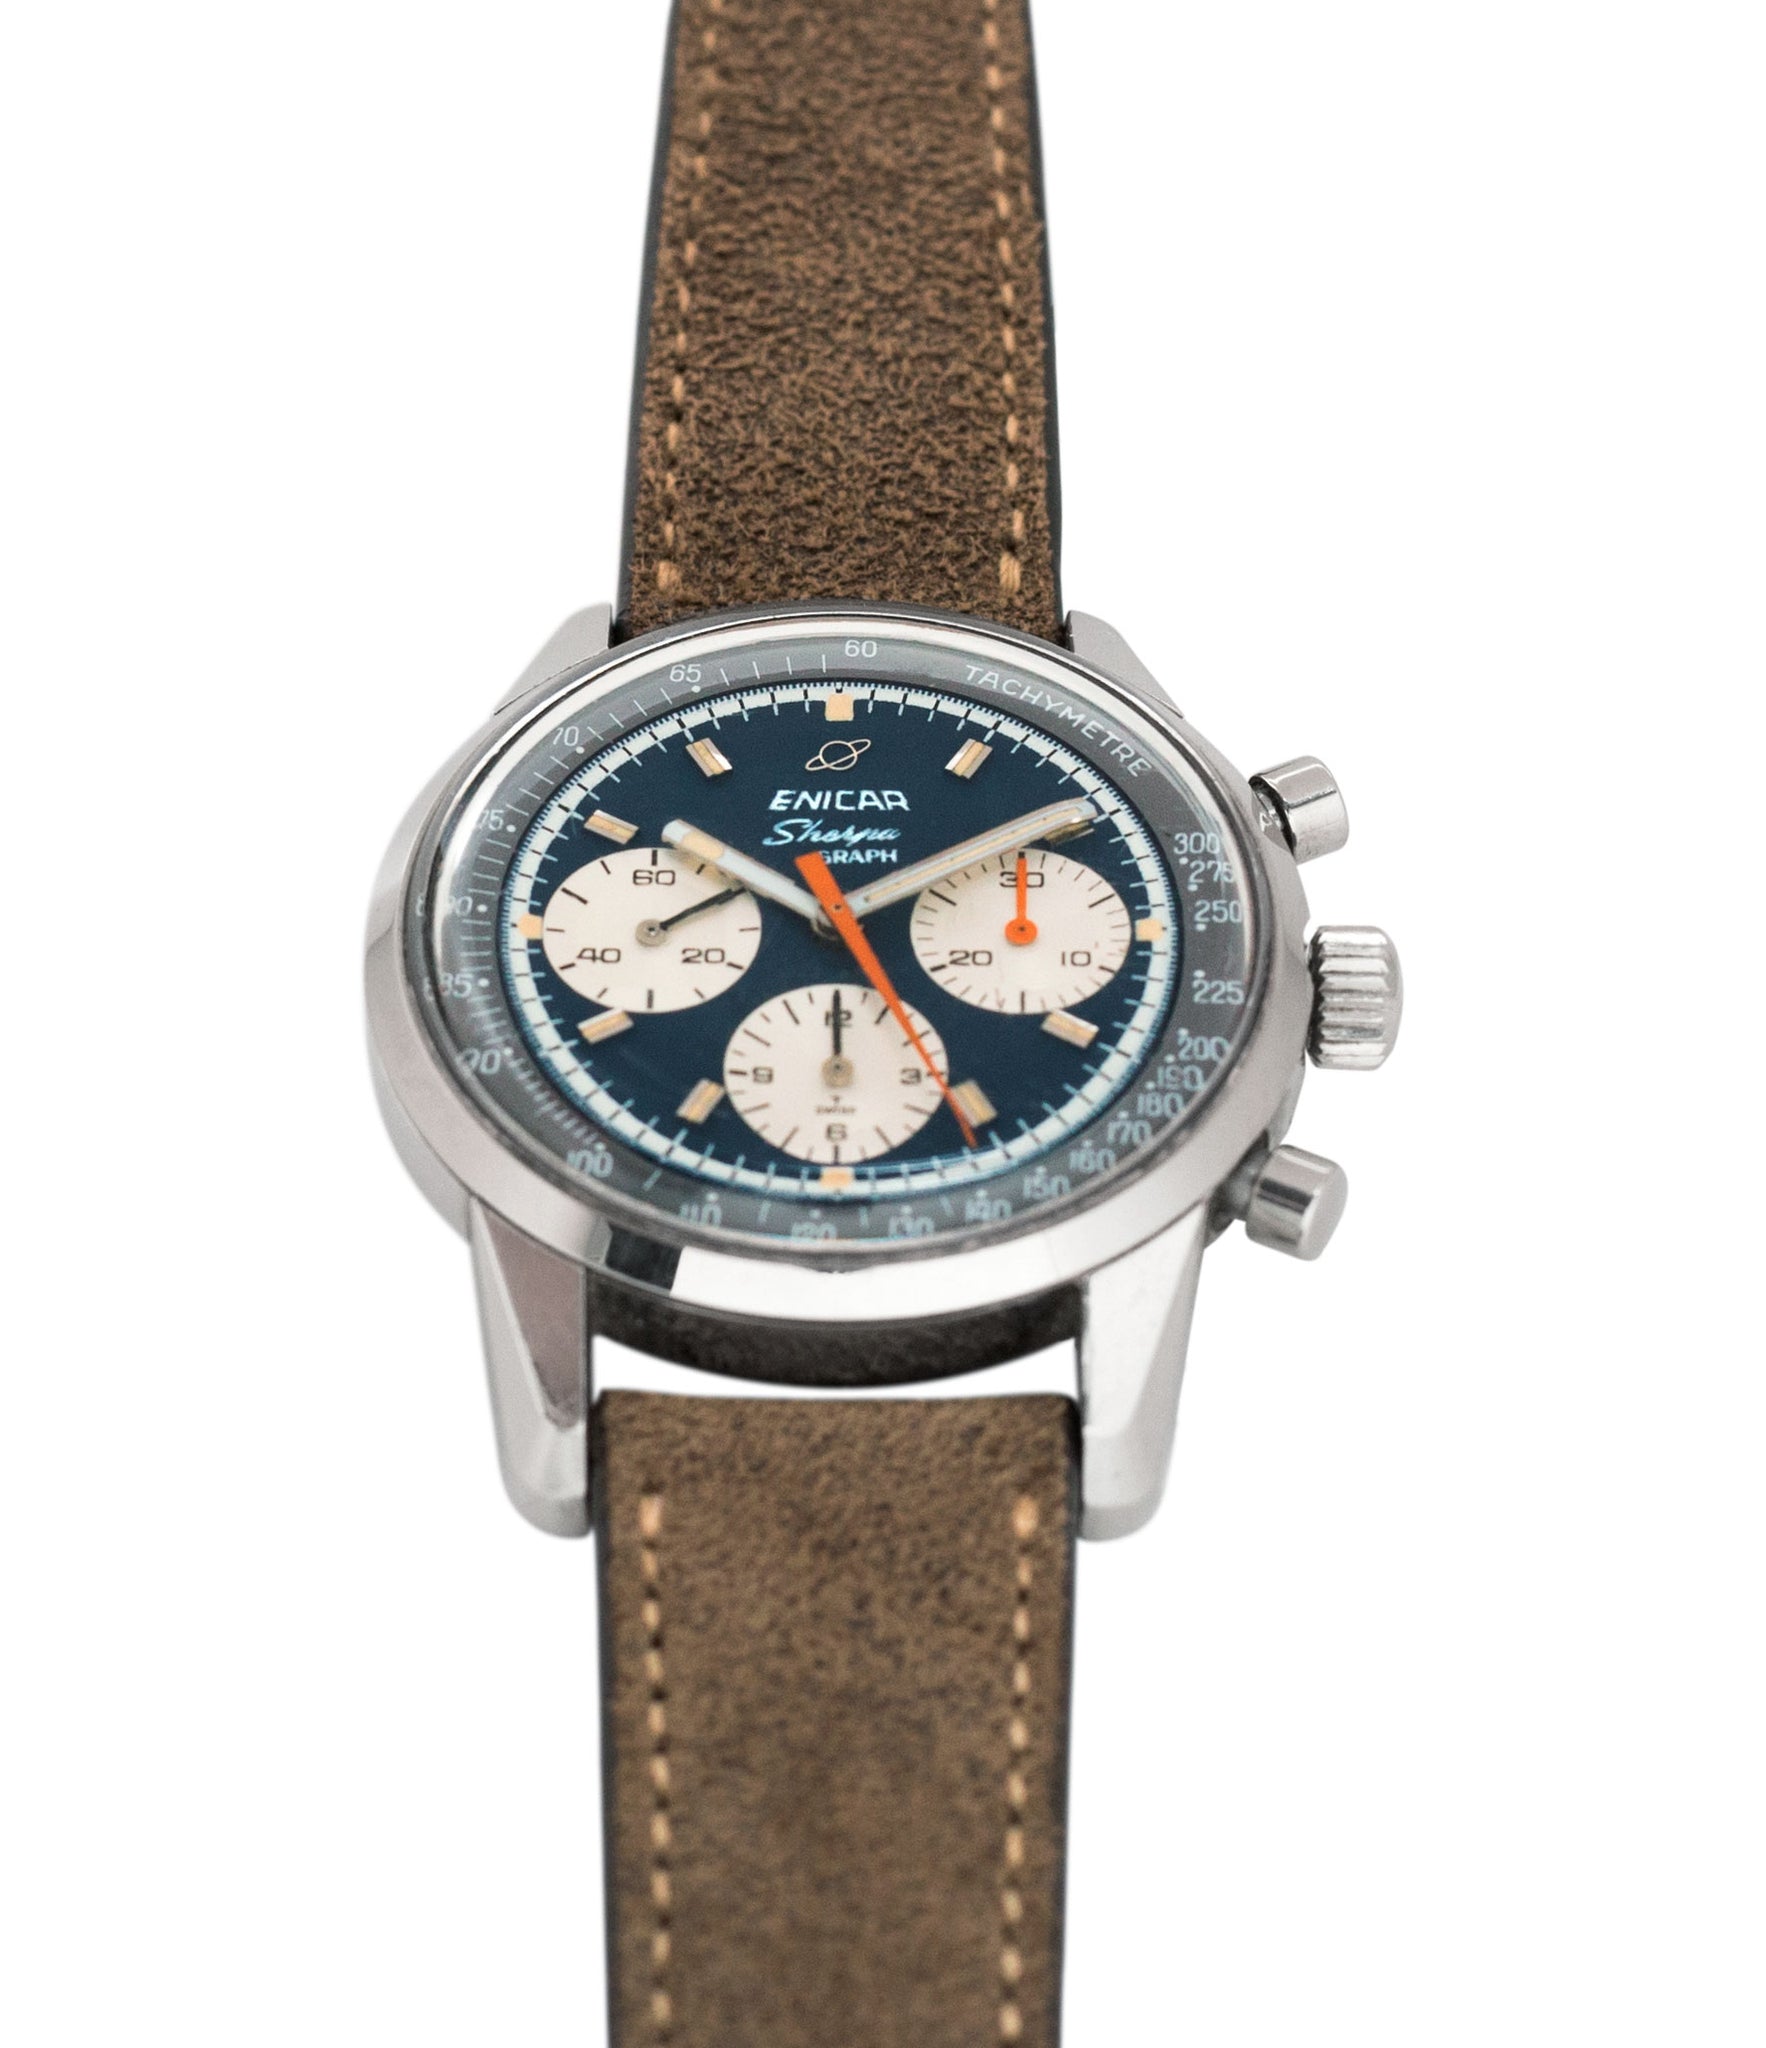 buy vintage Jim Clark Mark IV Enicar Sherpa Graph 300 Ref. 072-02-01 steel chronograph sport racing watch for sale online at A Collected Man London UK vintage watch specialist